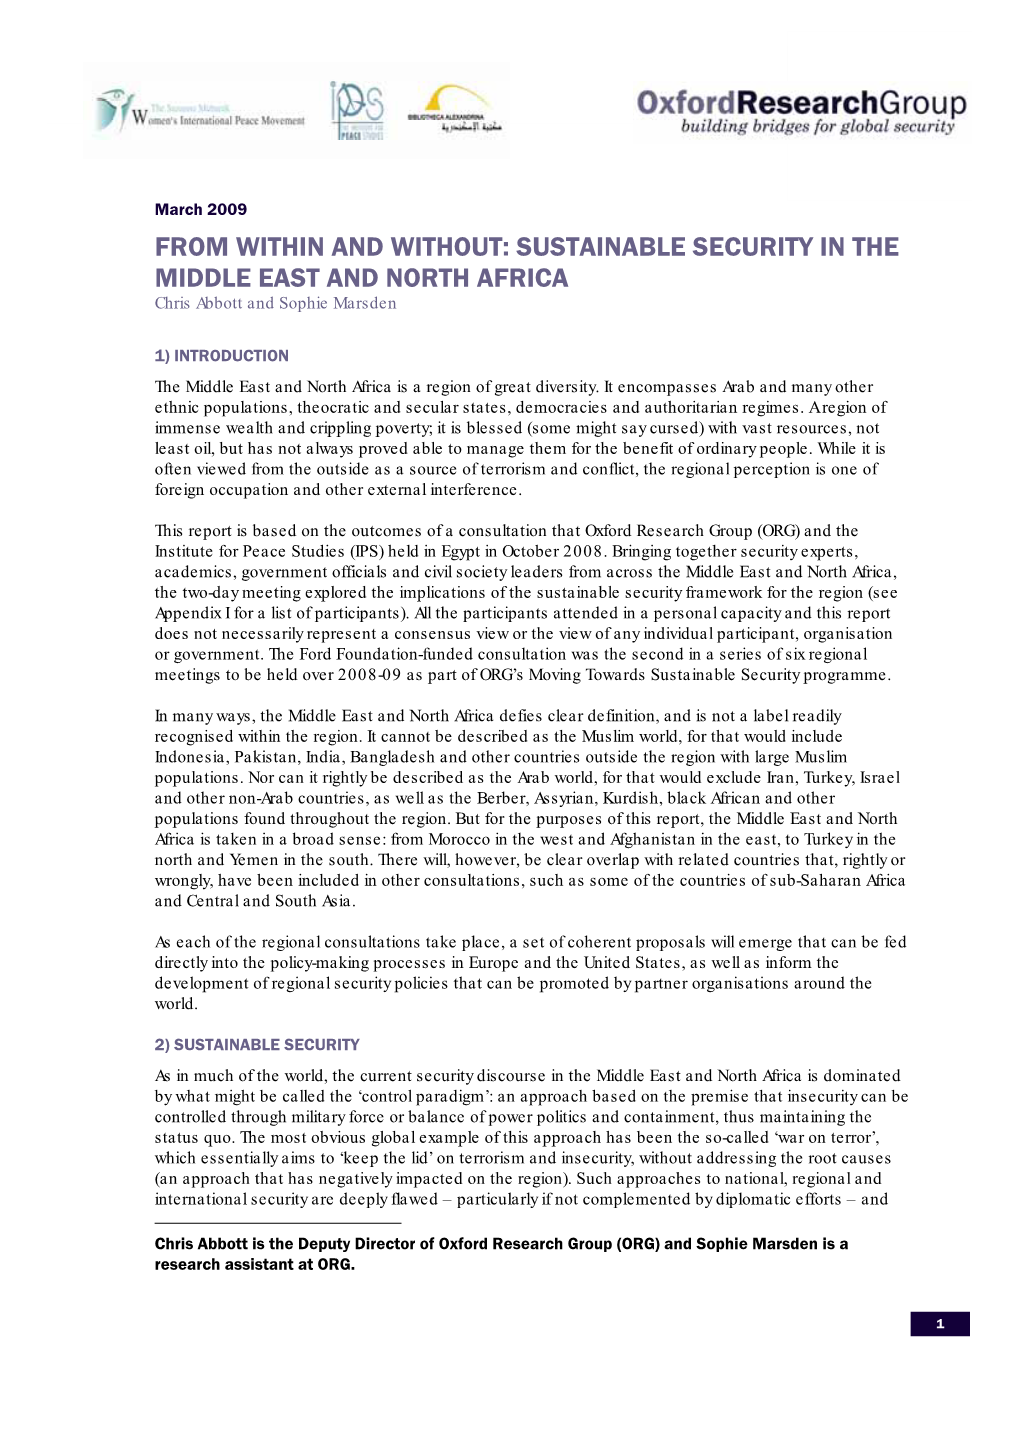 Sustainable Security in the Middle East and North Africa